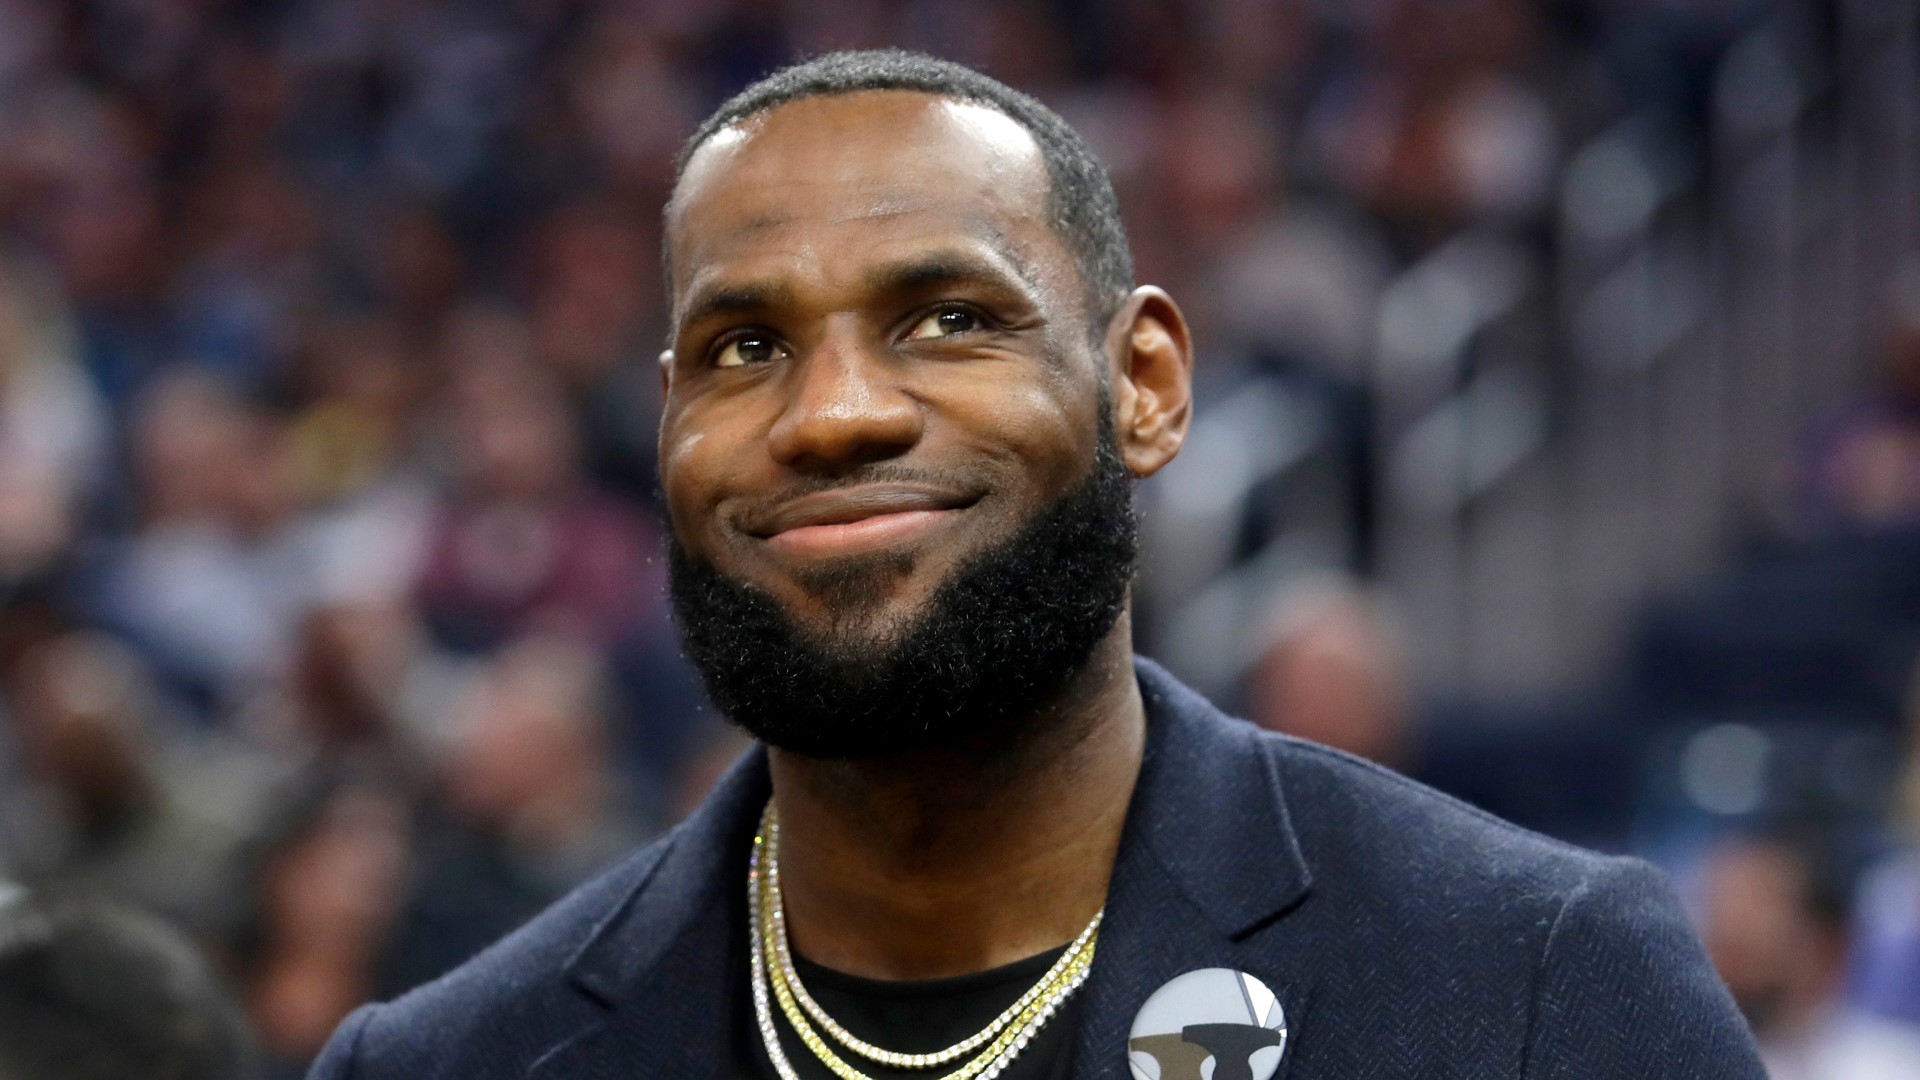 A group of fans were ejected after jawing with LeBron James during the game against the Atlanta Hawks.